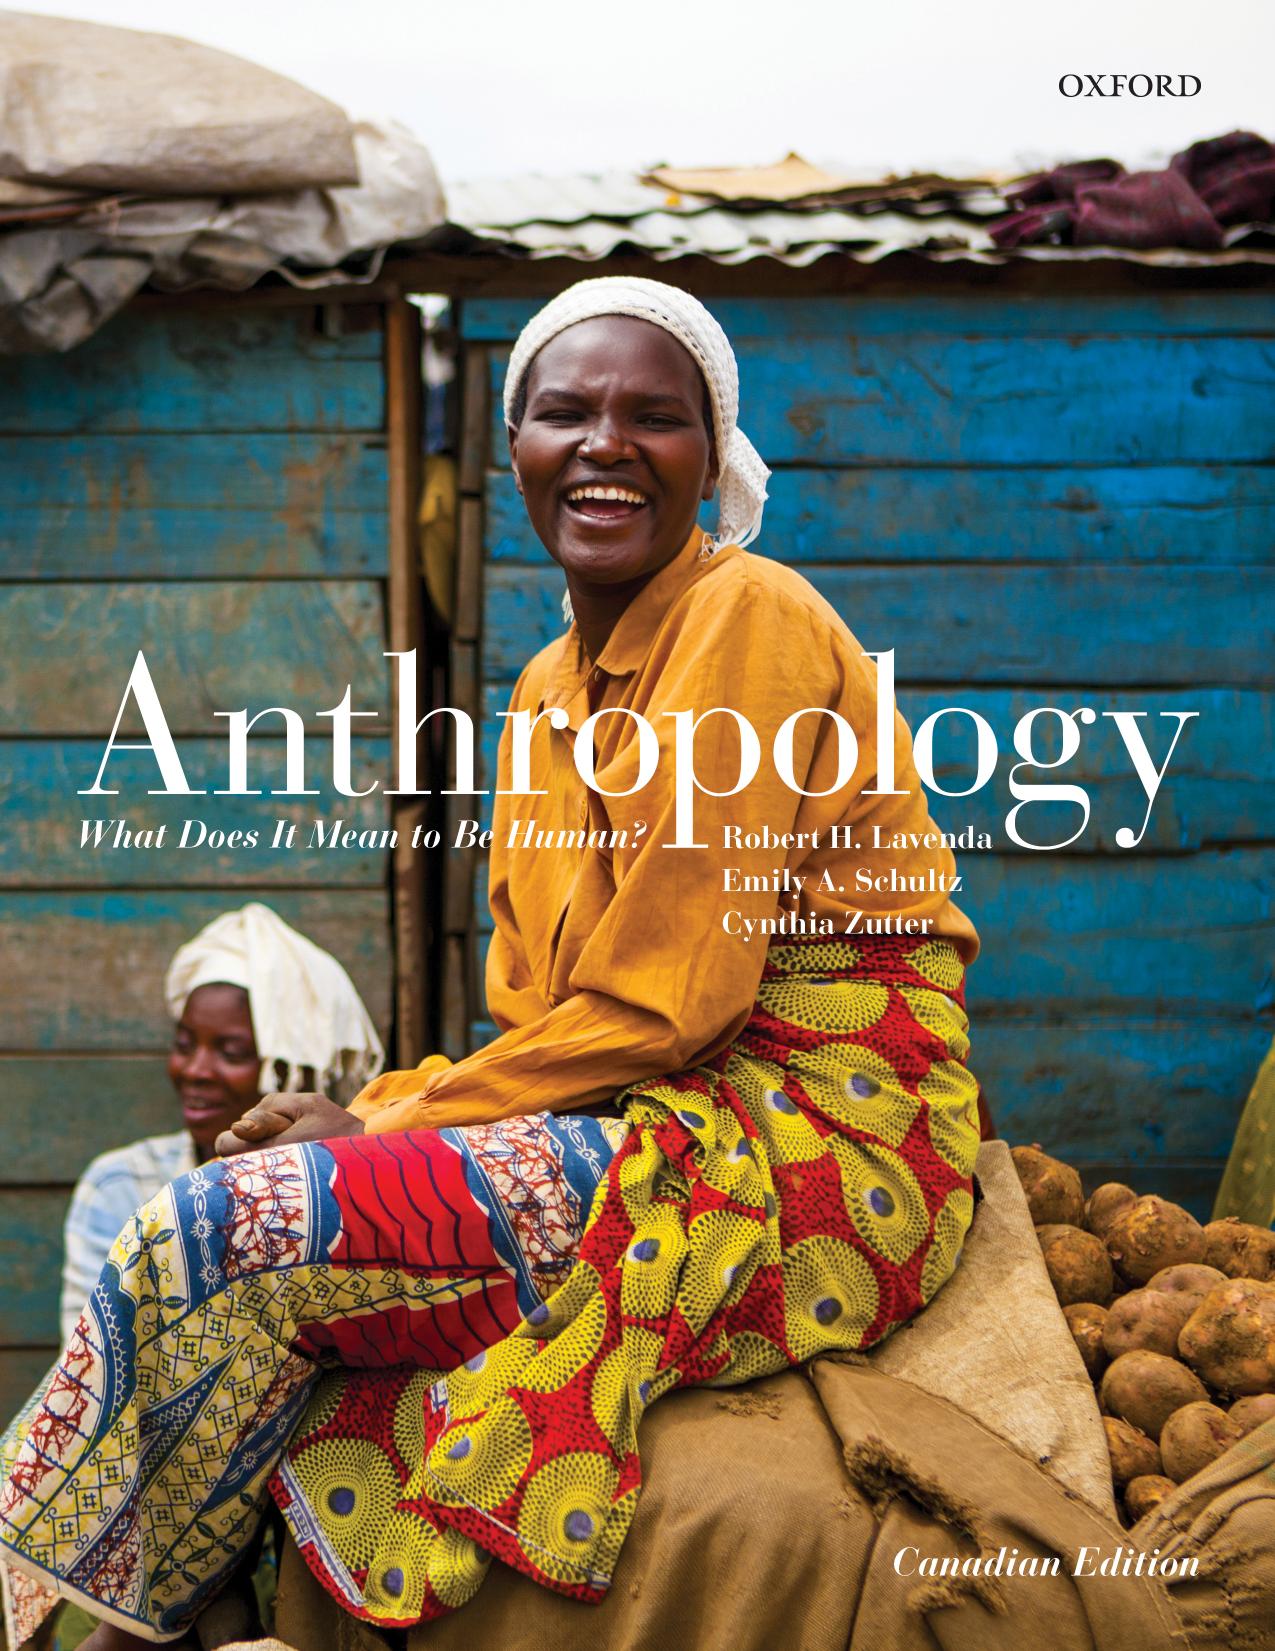 (eBook PDF)Anthropology: What Does it Mean to Be Human? Canadian Edition by Robert H. Lavenda,Emily A. Schultz,Cynthia Zutter